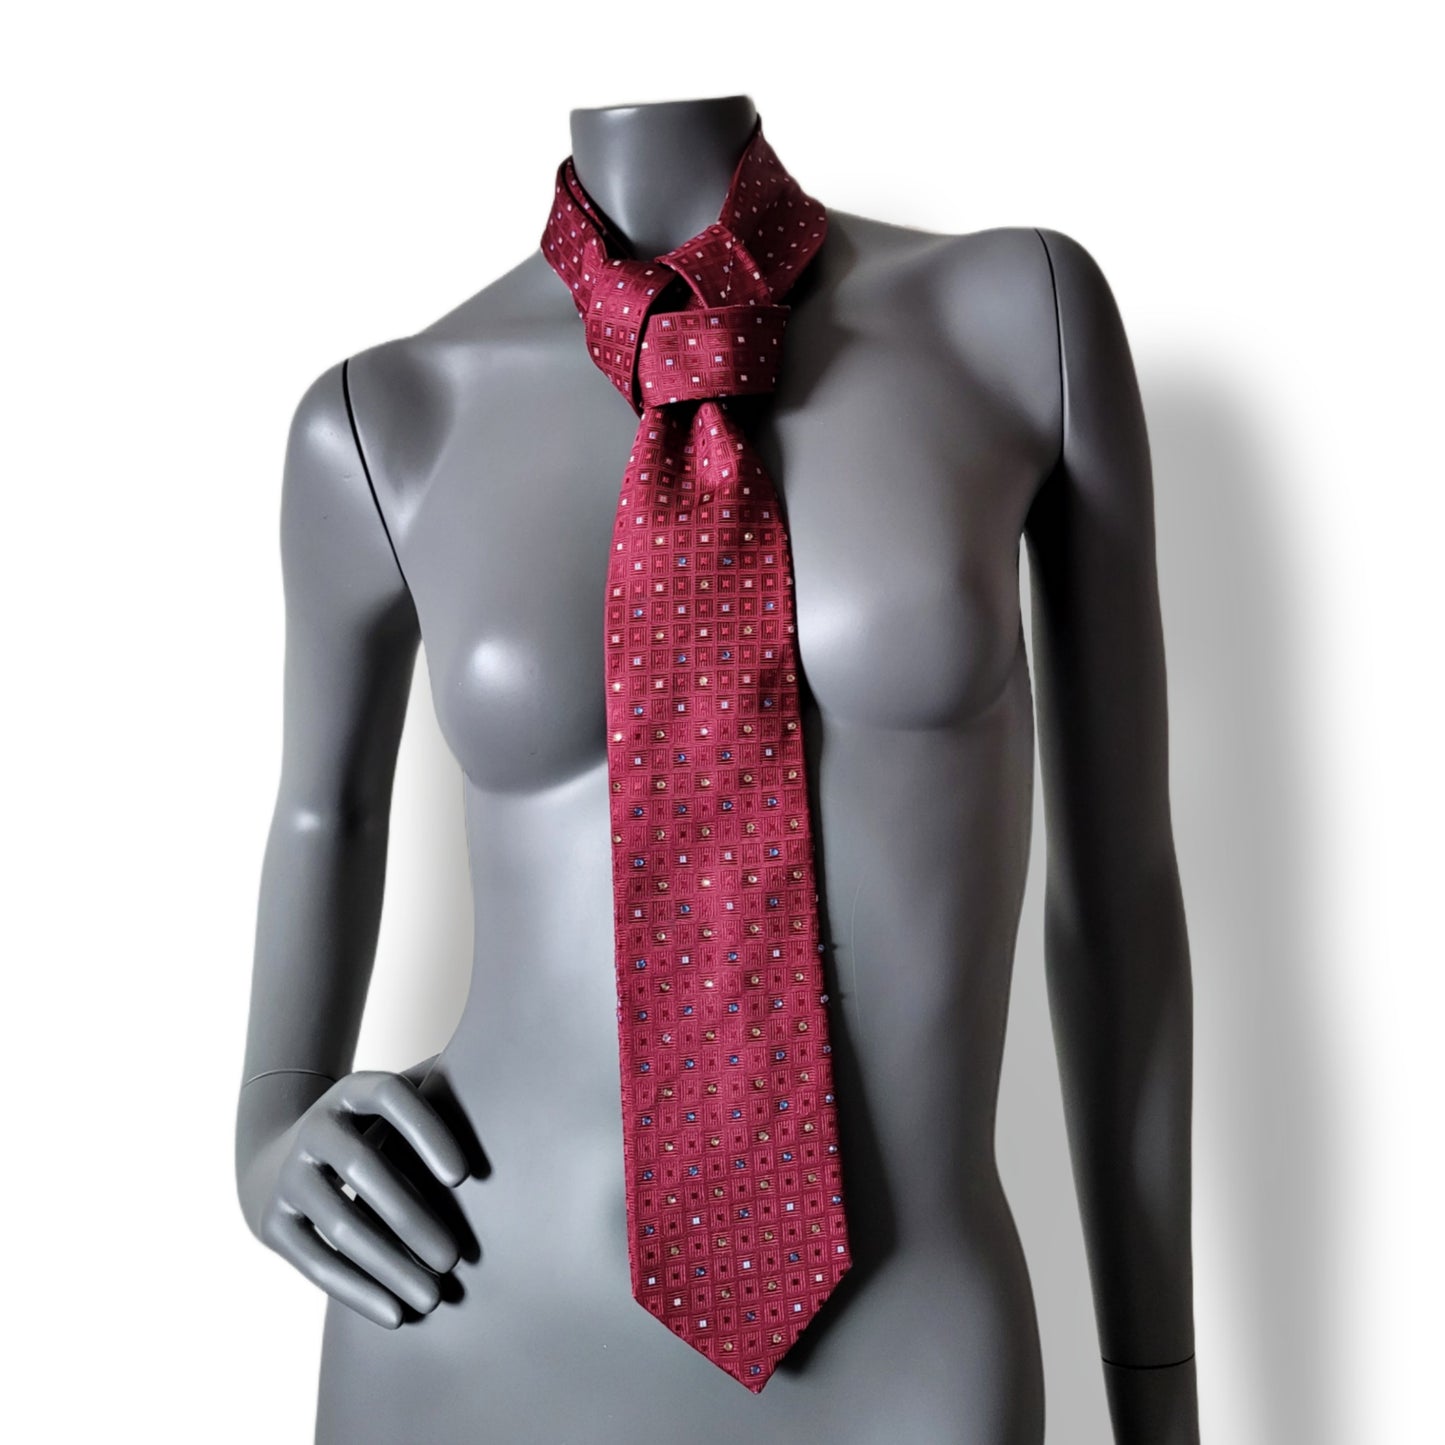 Another Dance collection: Modern Love tie, vintage burgundy | dark red silk necktie with glass crystals in light yellow and blue